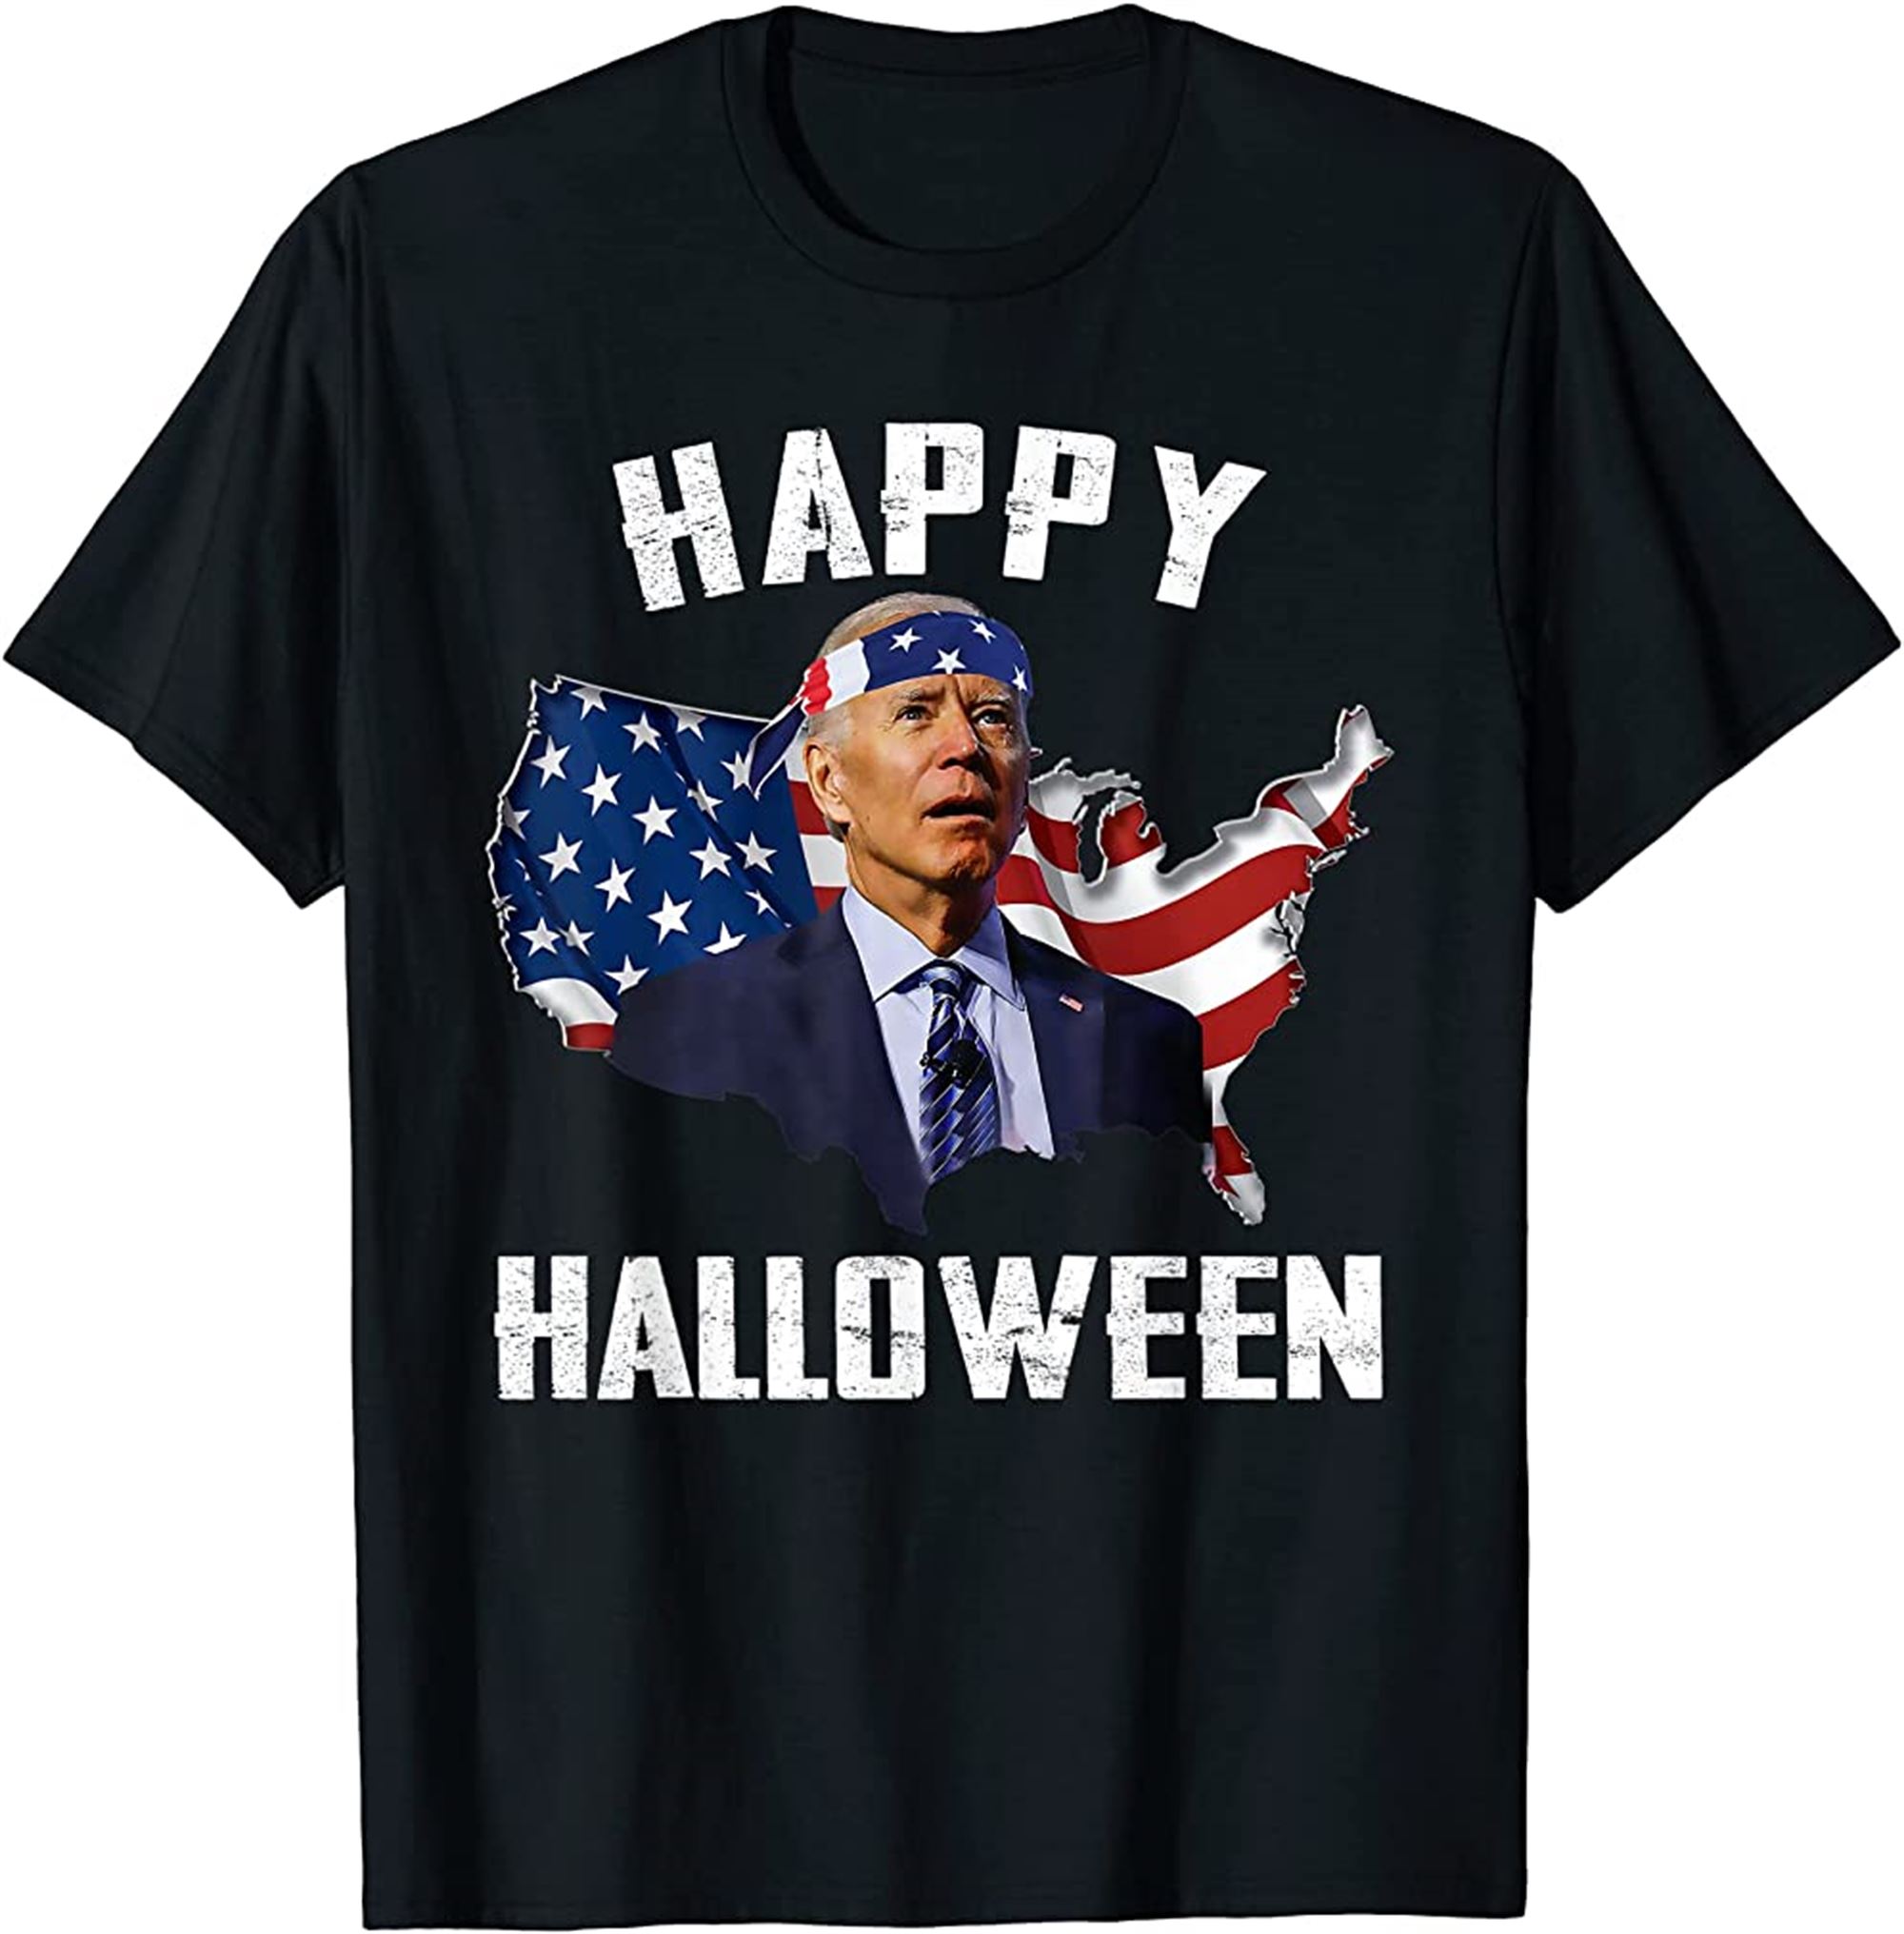 Happy Halloween Joe Biden Confused American Flag 4th Of July T-shirt Size Up To 5xl